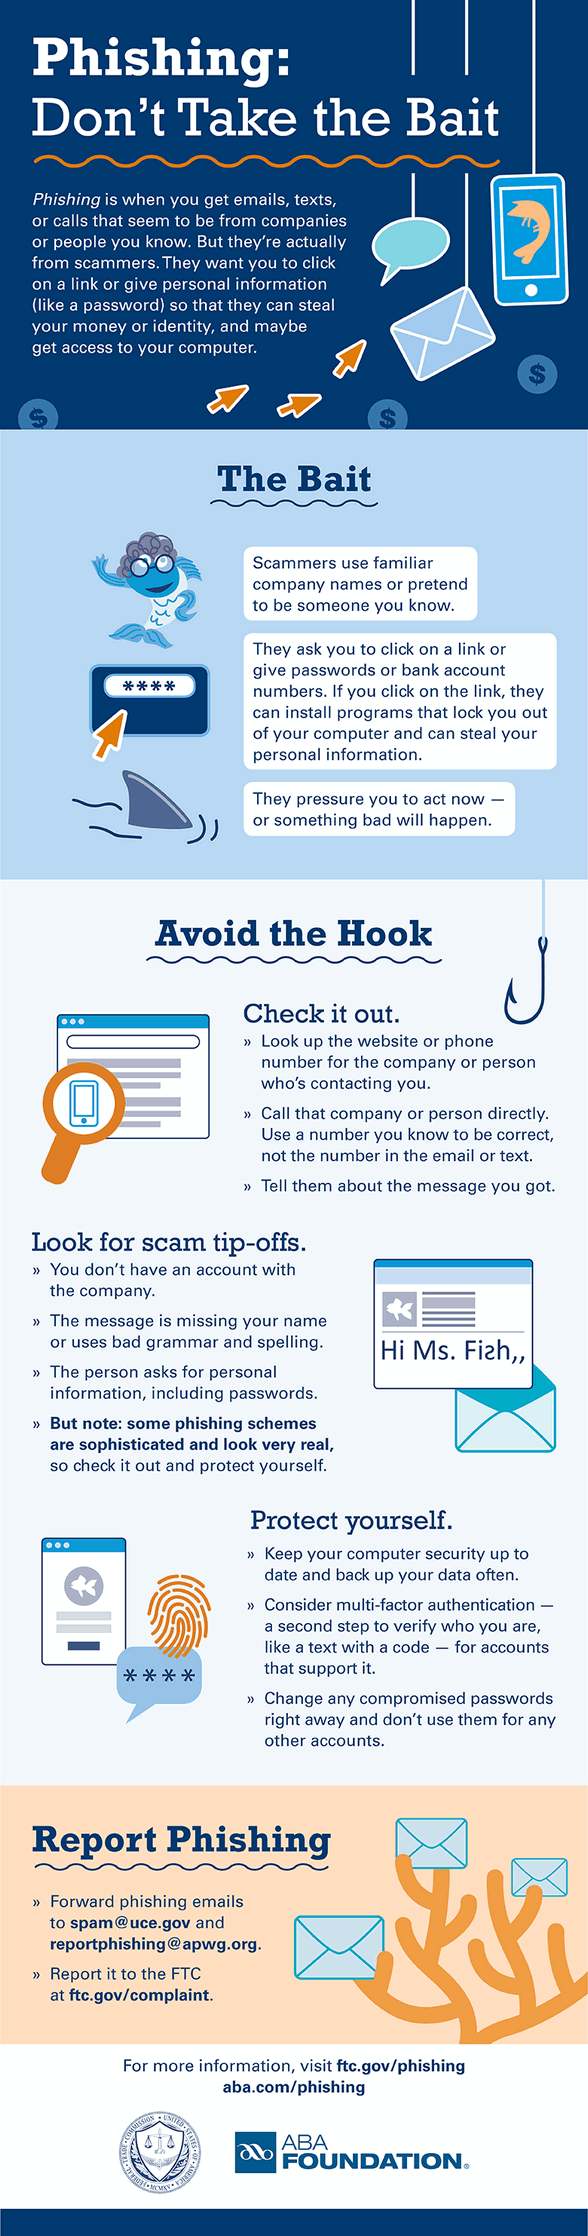 Cloudeight Internet - Avoid phishing scams and identity theft